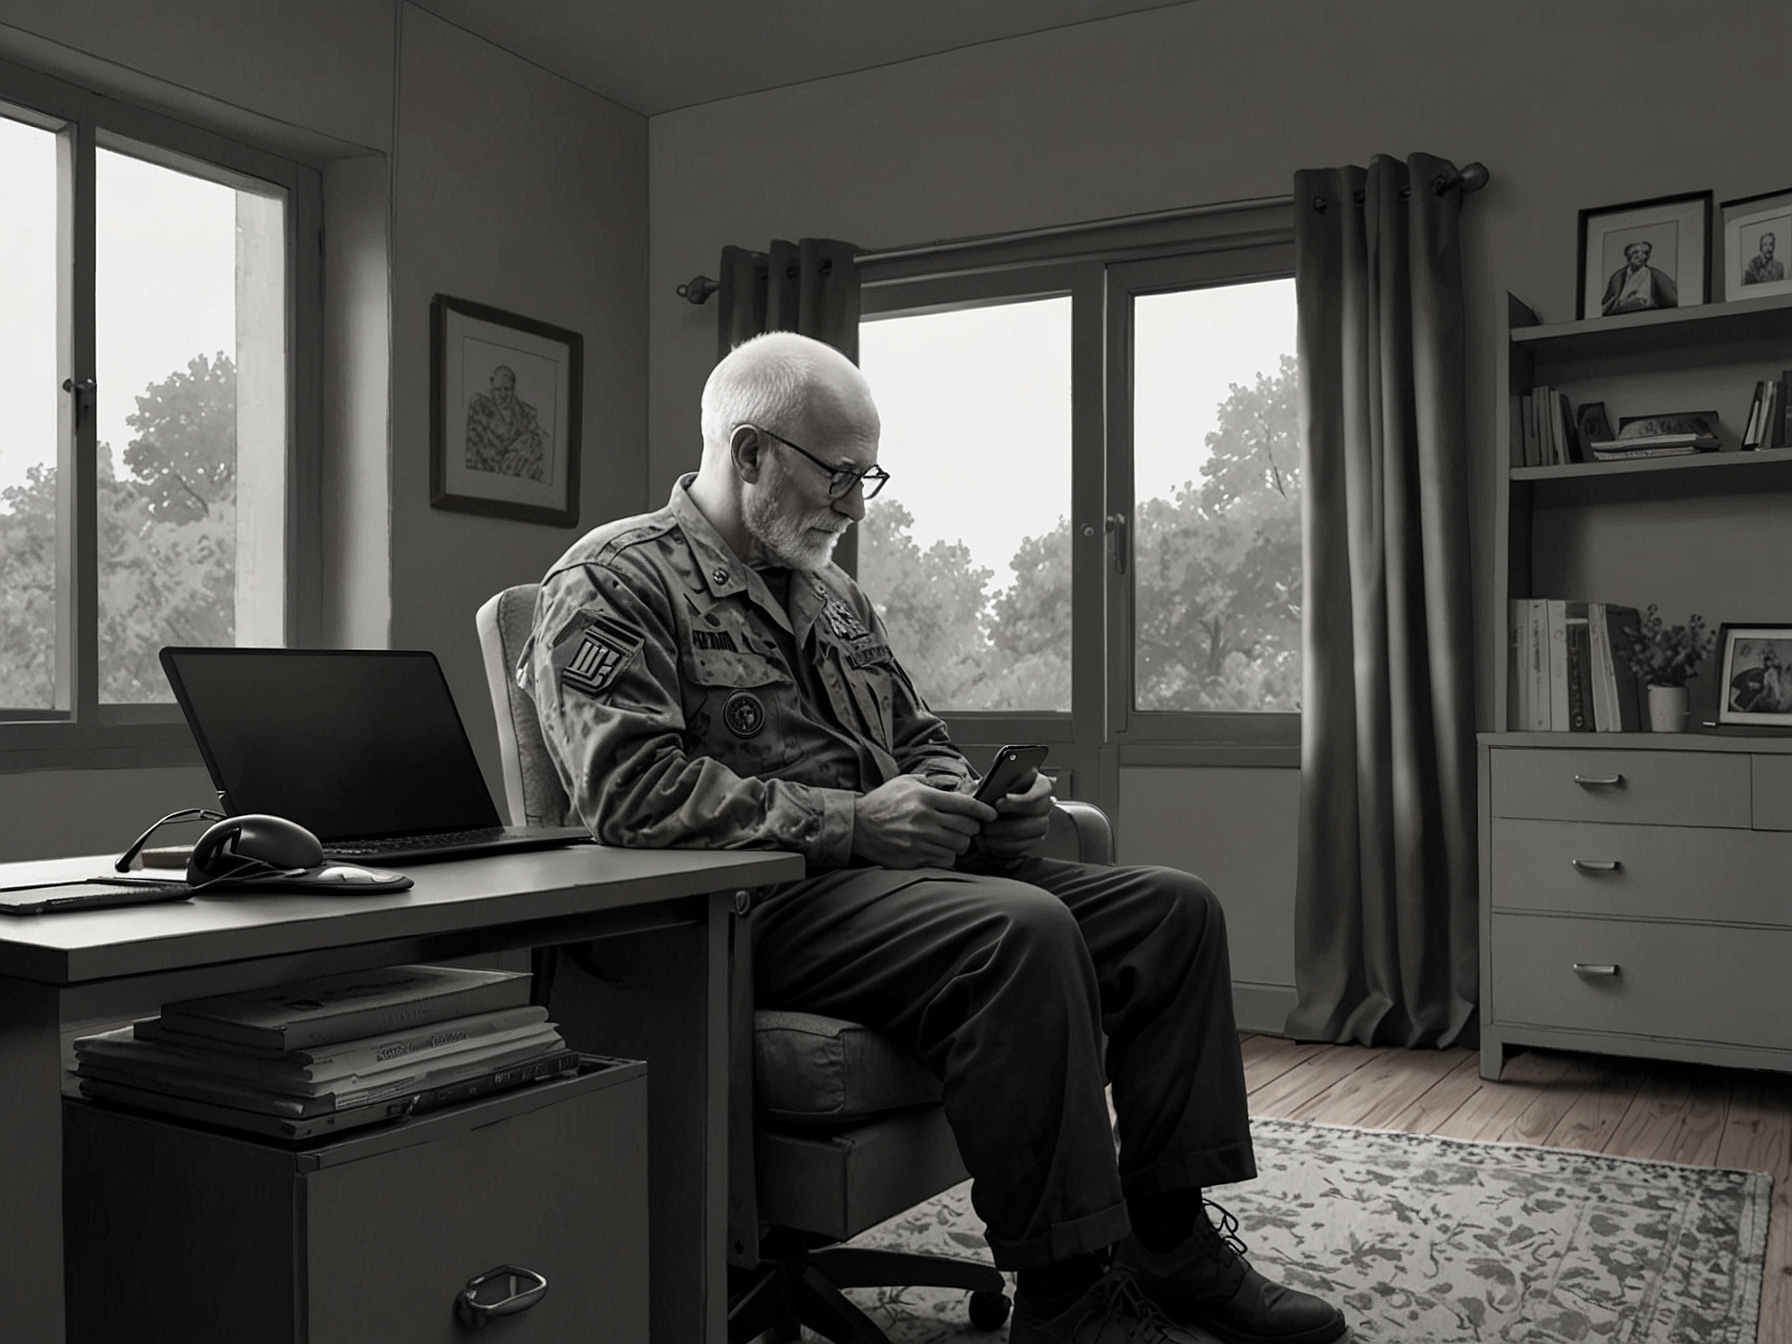 A depiction of a veteran using telehealth services for a mental health consultation, highlighting the confidentiality and reduced stigma associated with virtual therapy sessions.